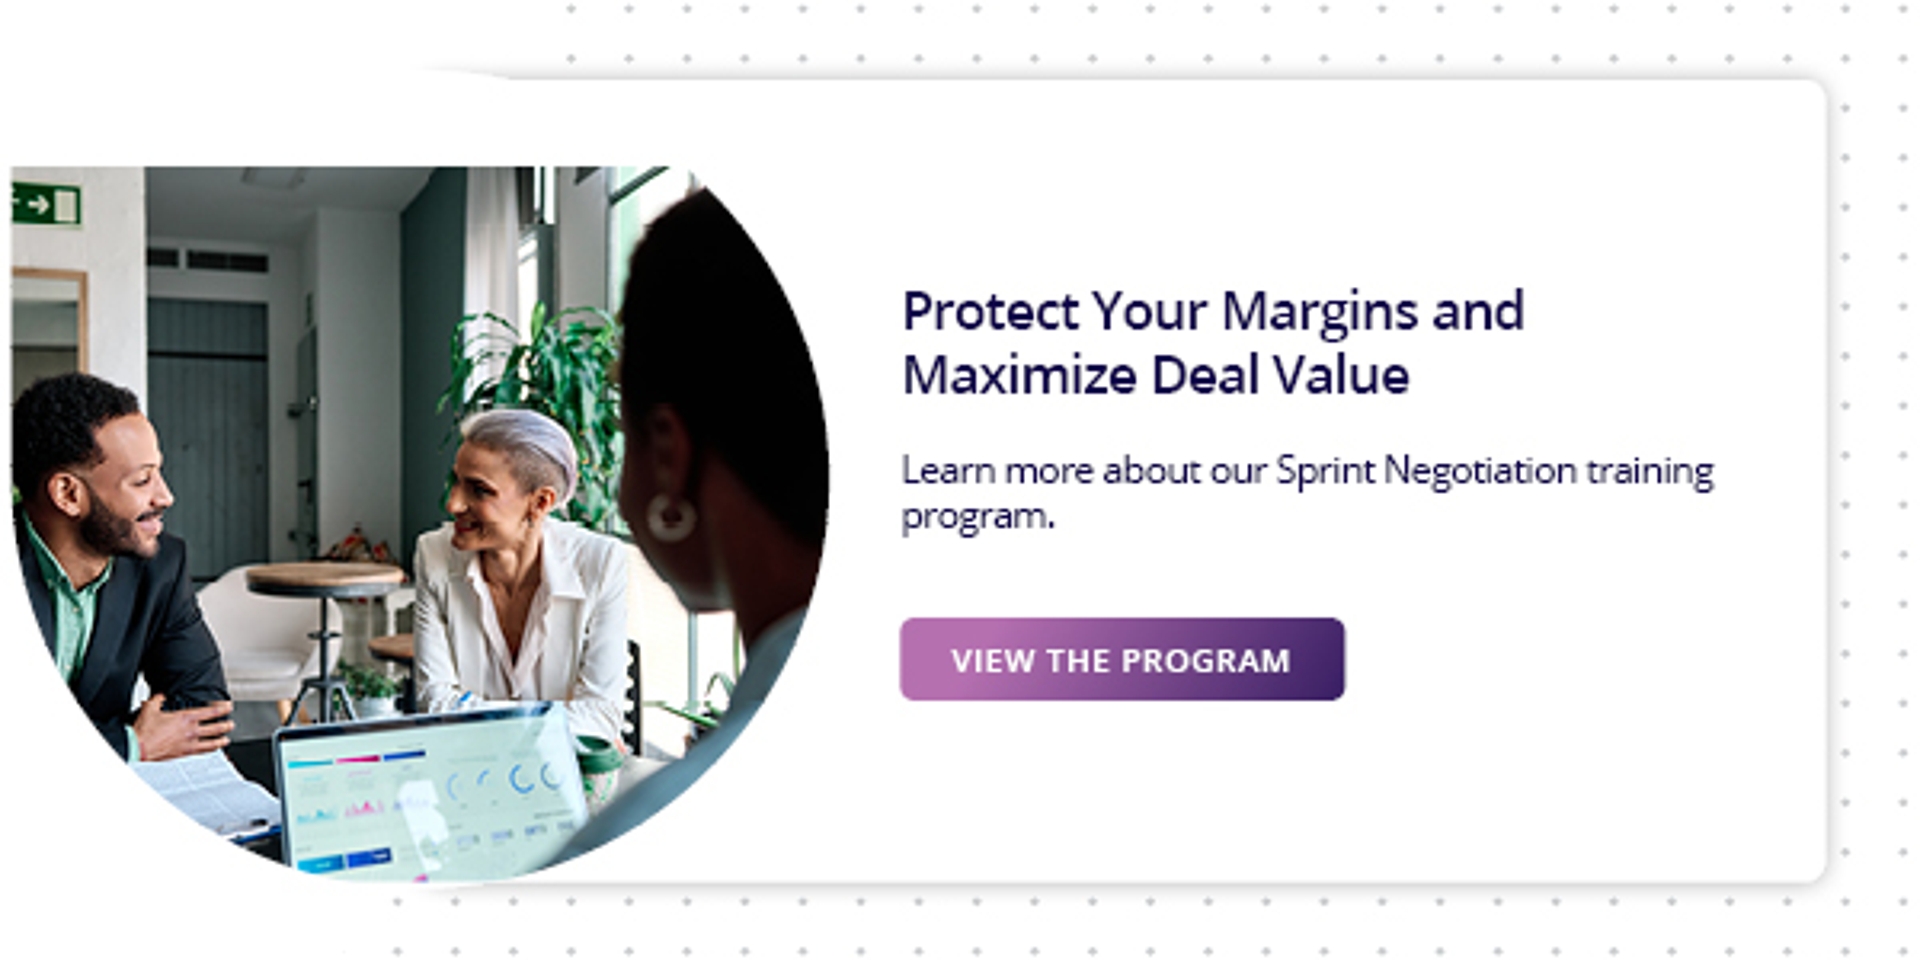 Learn about our Sprint Negotiations™ sales training program